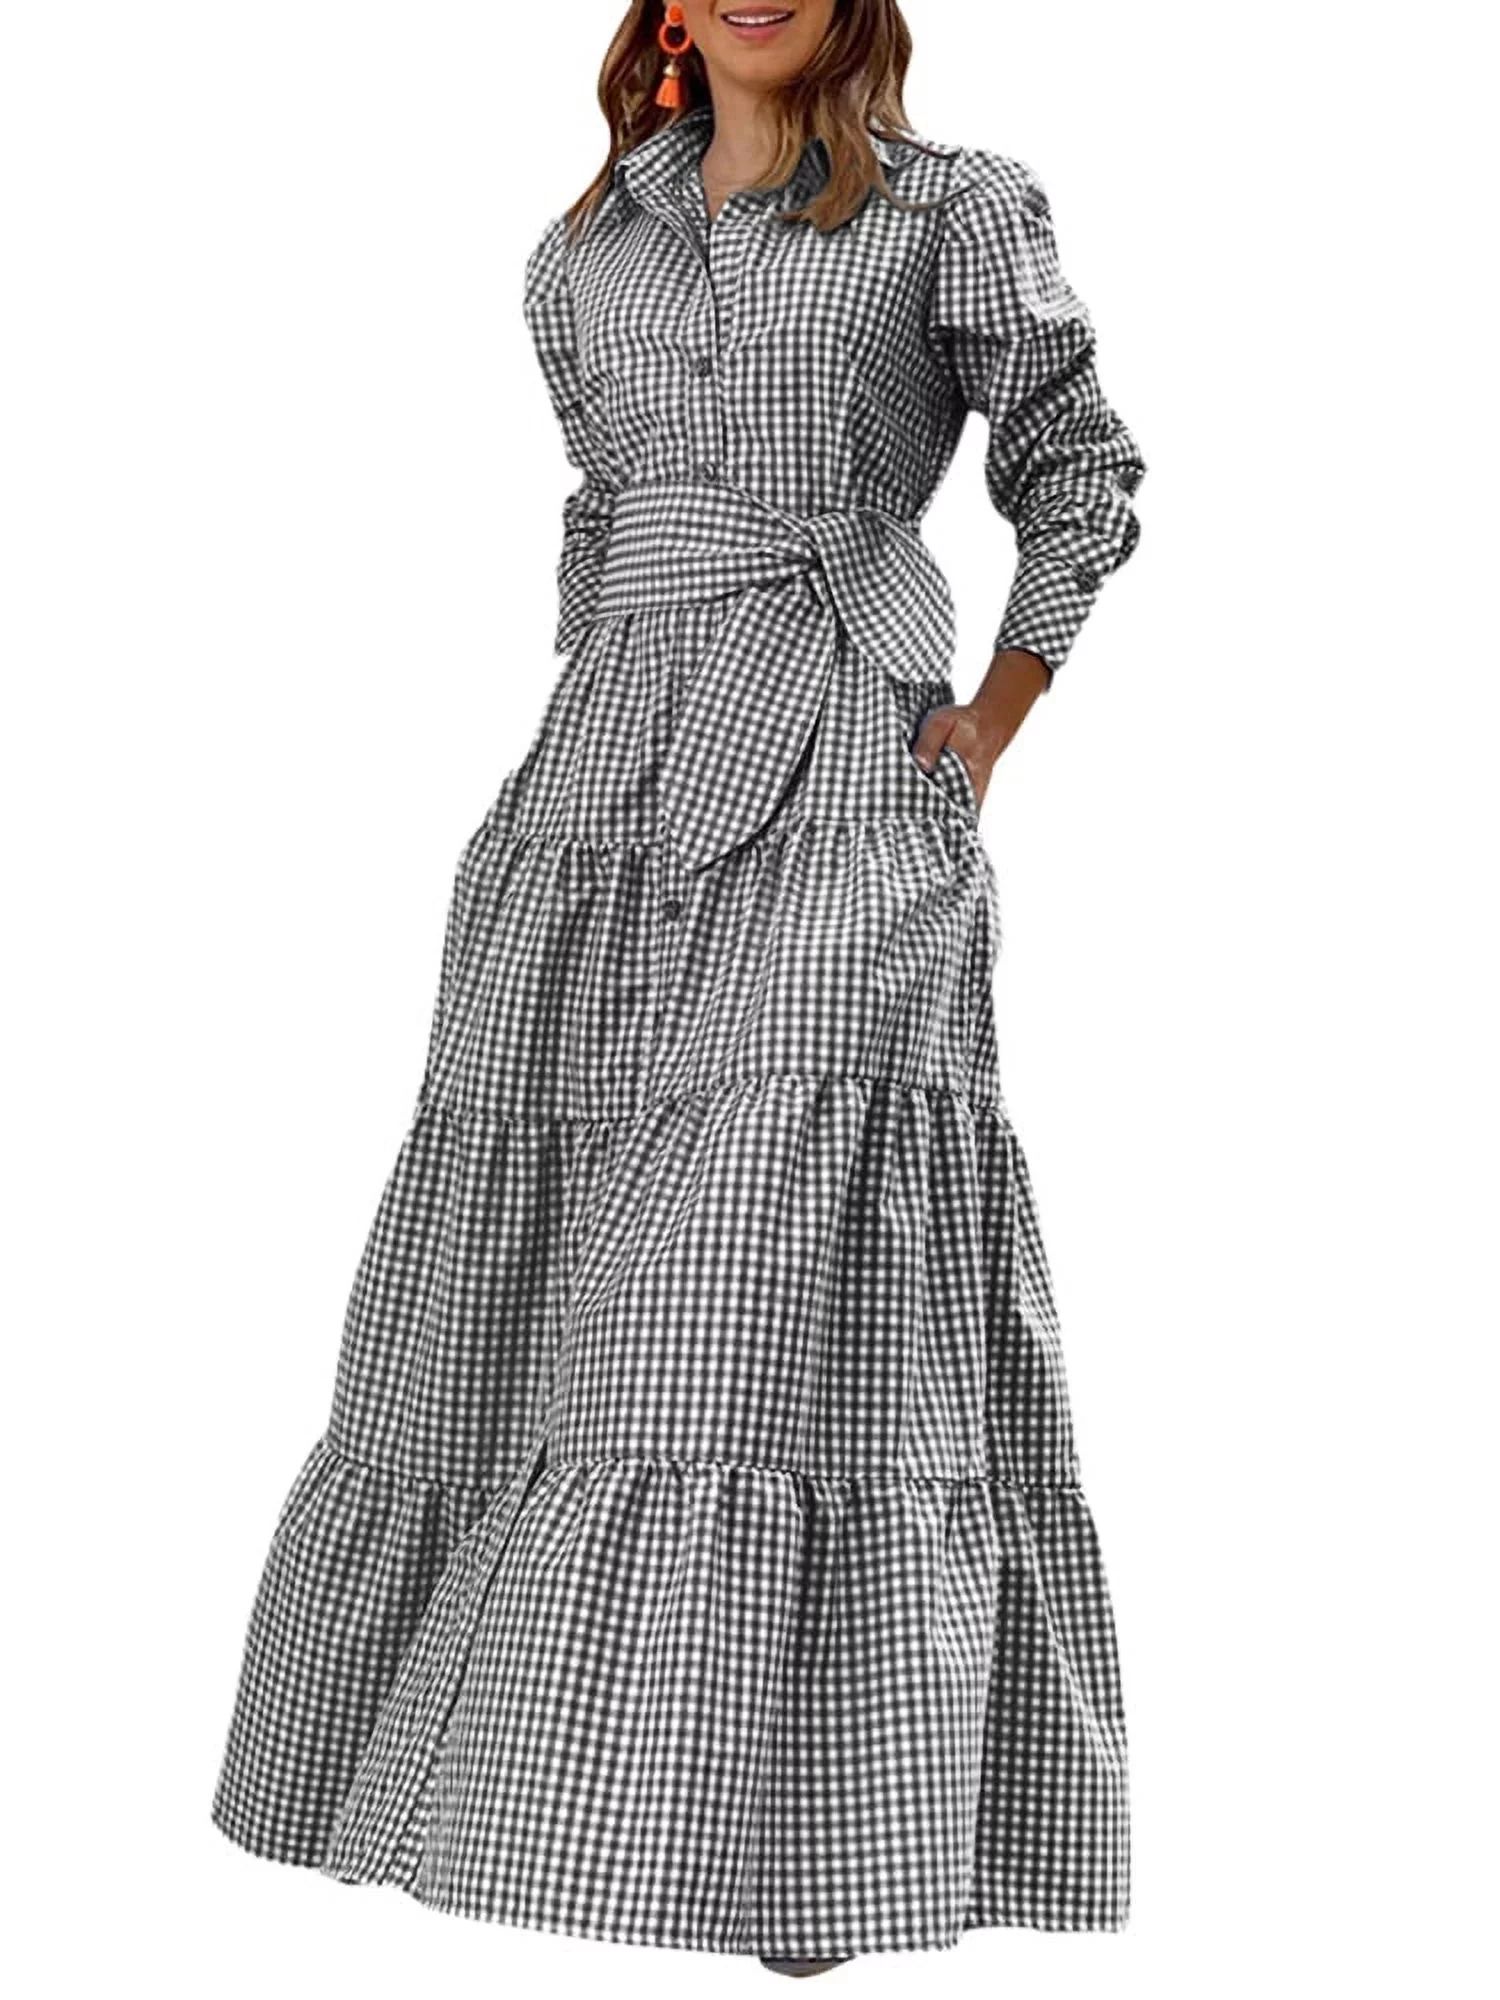 Women's Long Sleeve Vintage Checked Maxi Dress Solid Color Plaid Casual Ruffle Dress | Walmart (US)